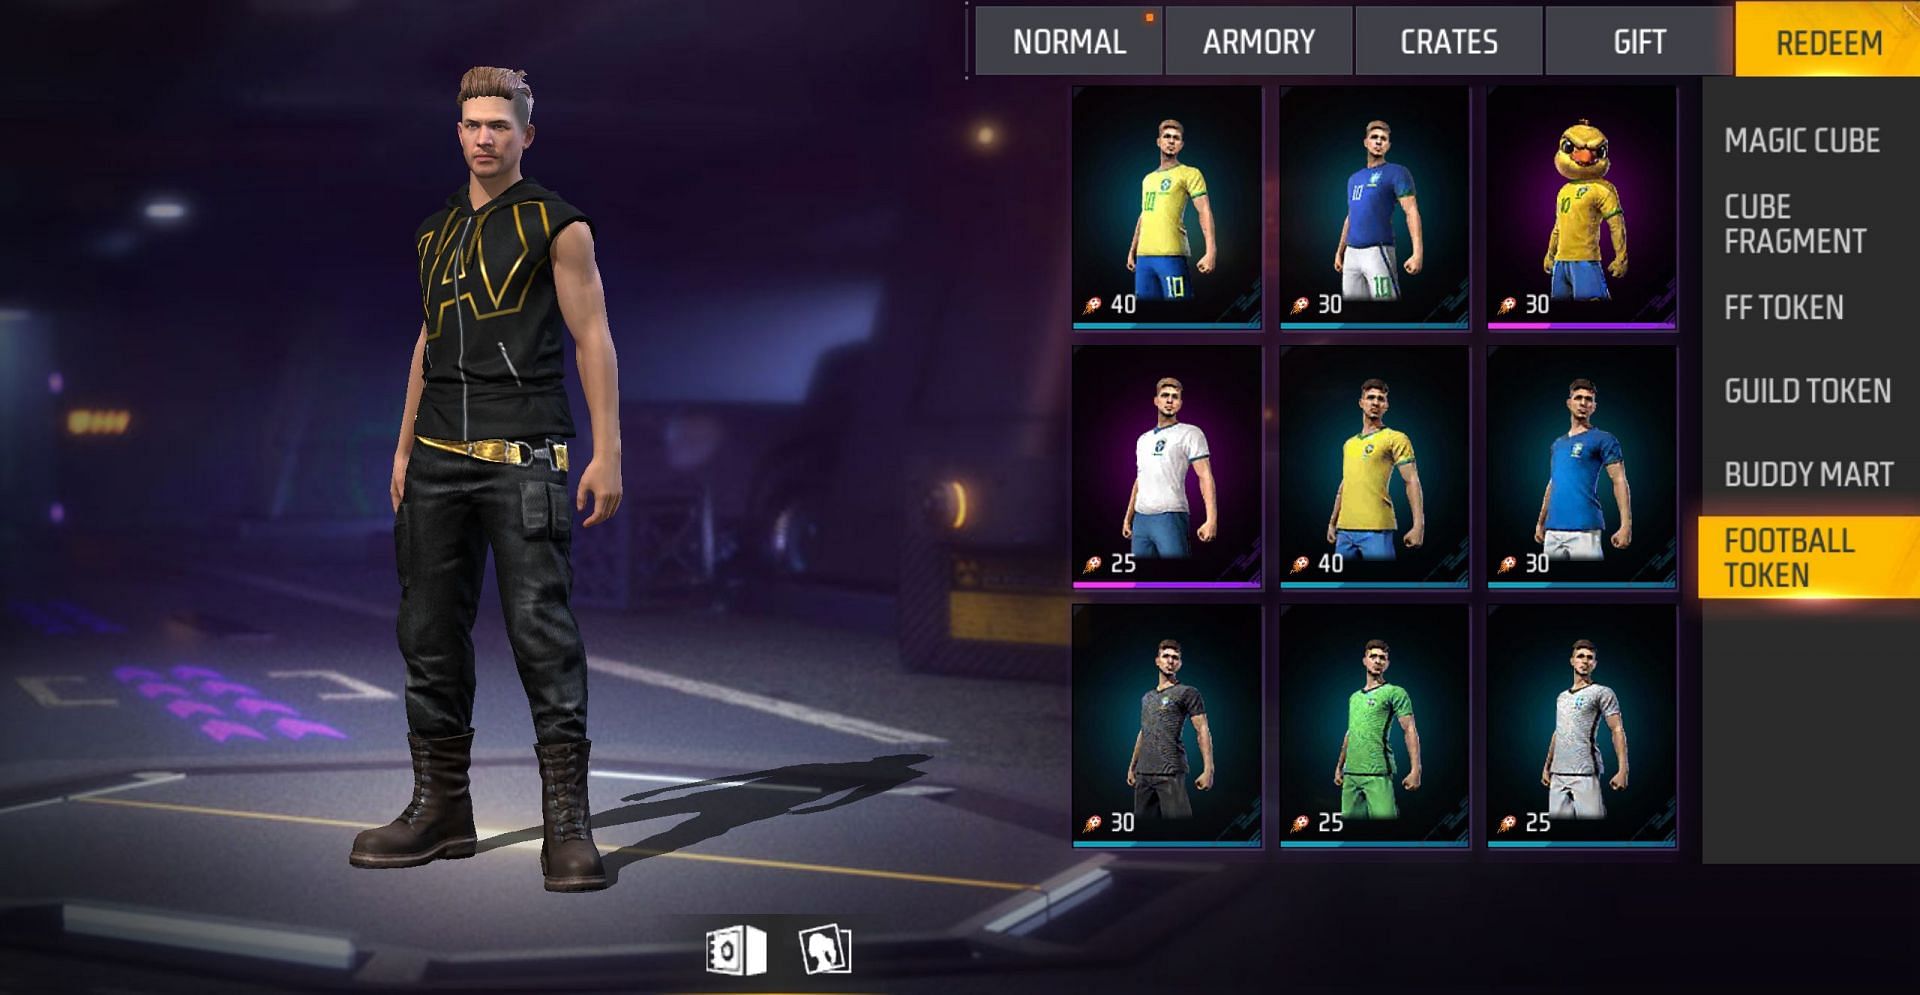 The items available in the exchange section (Image via Garena)